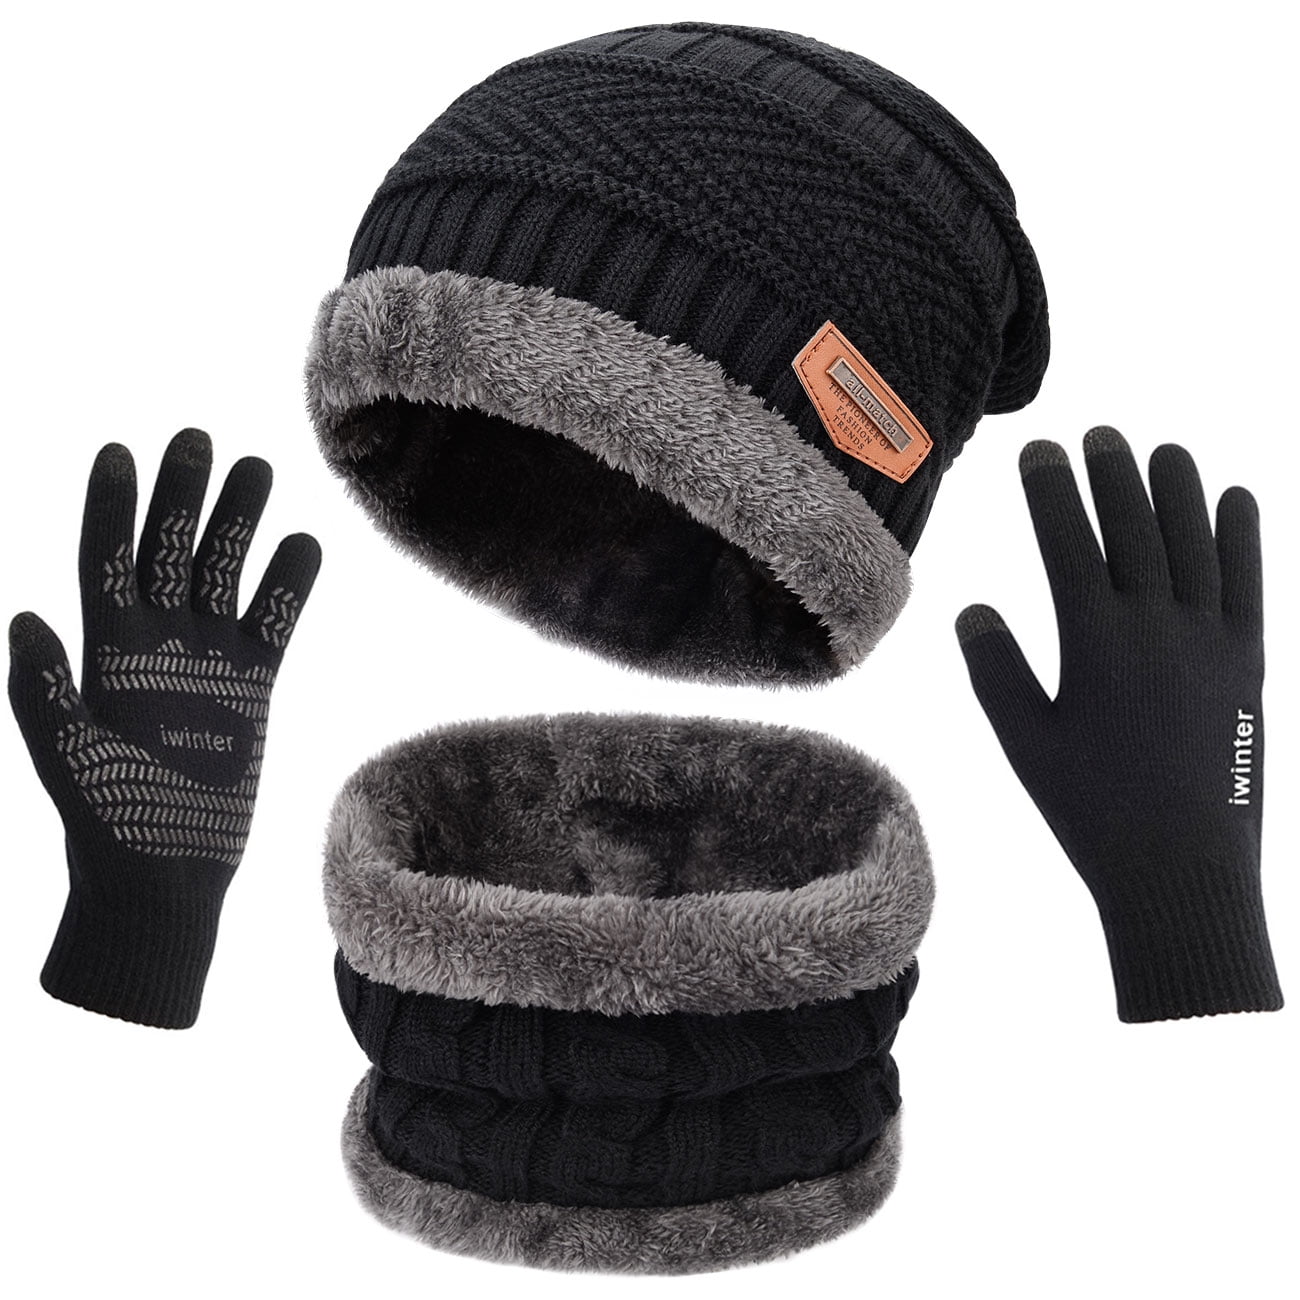 Ladies Womens Winter Bobble Hat & Touch Screen Gloves Set 